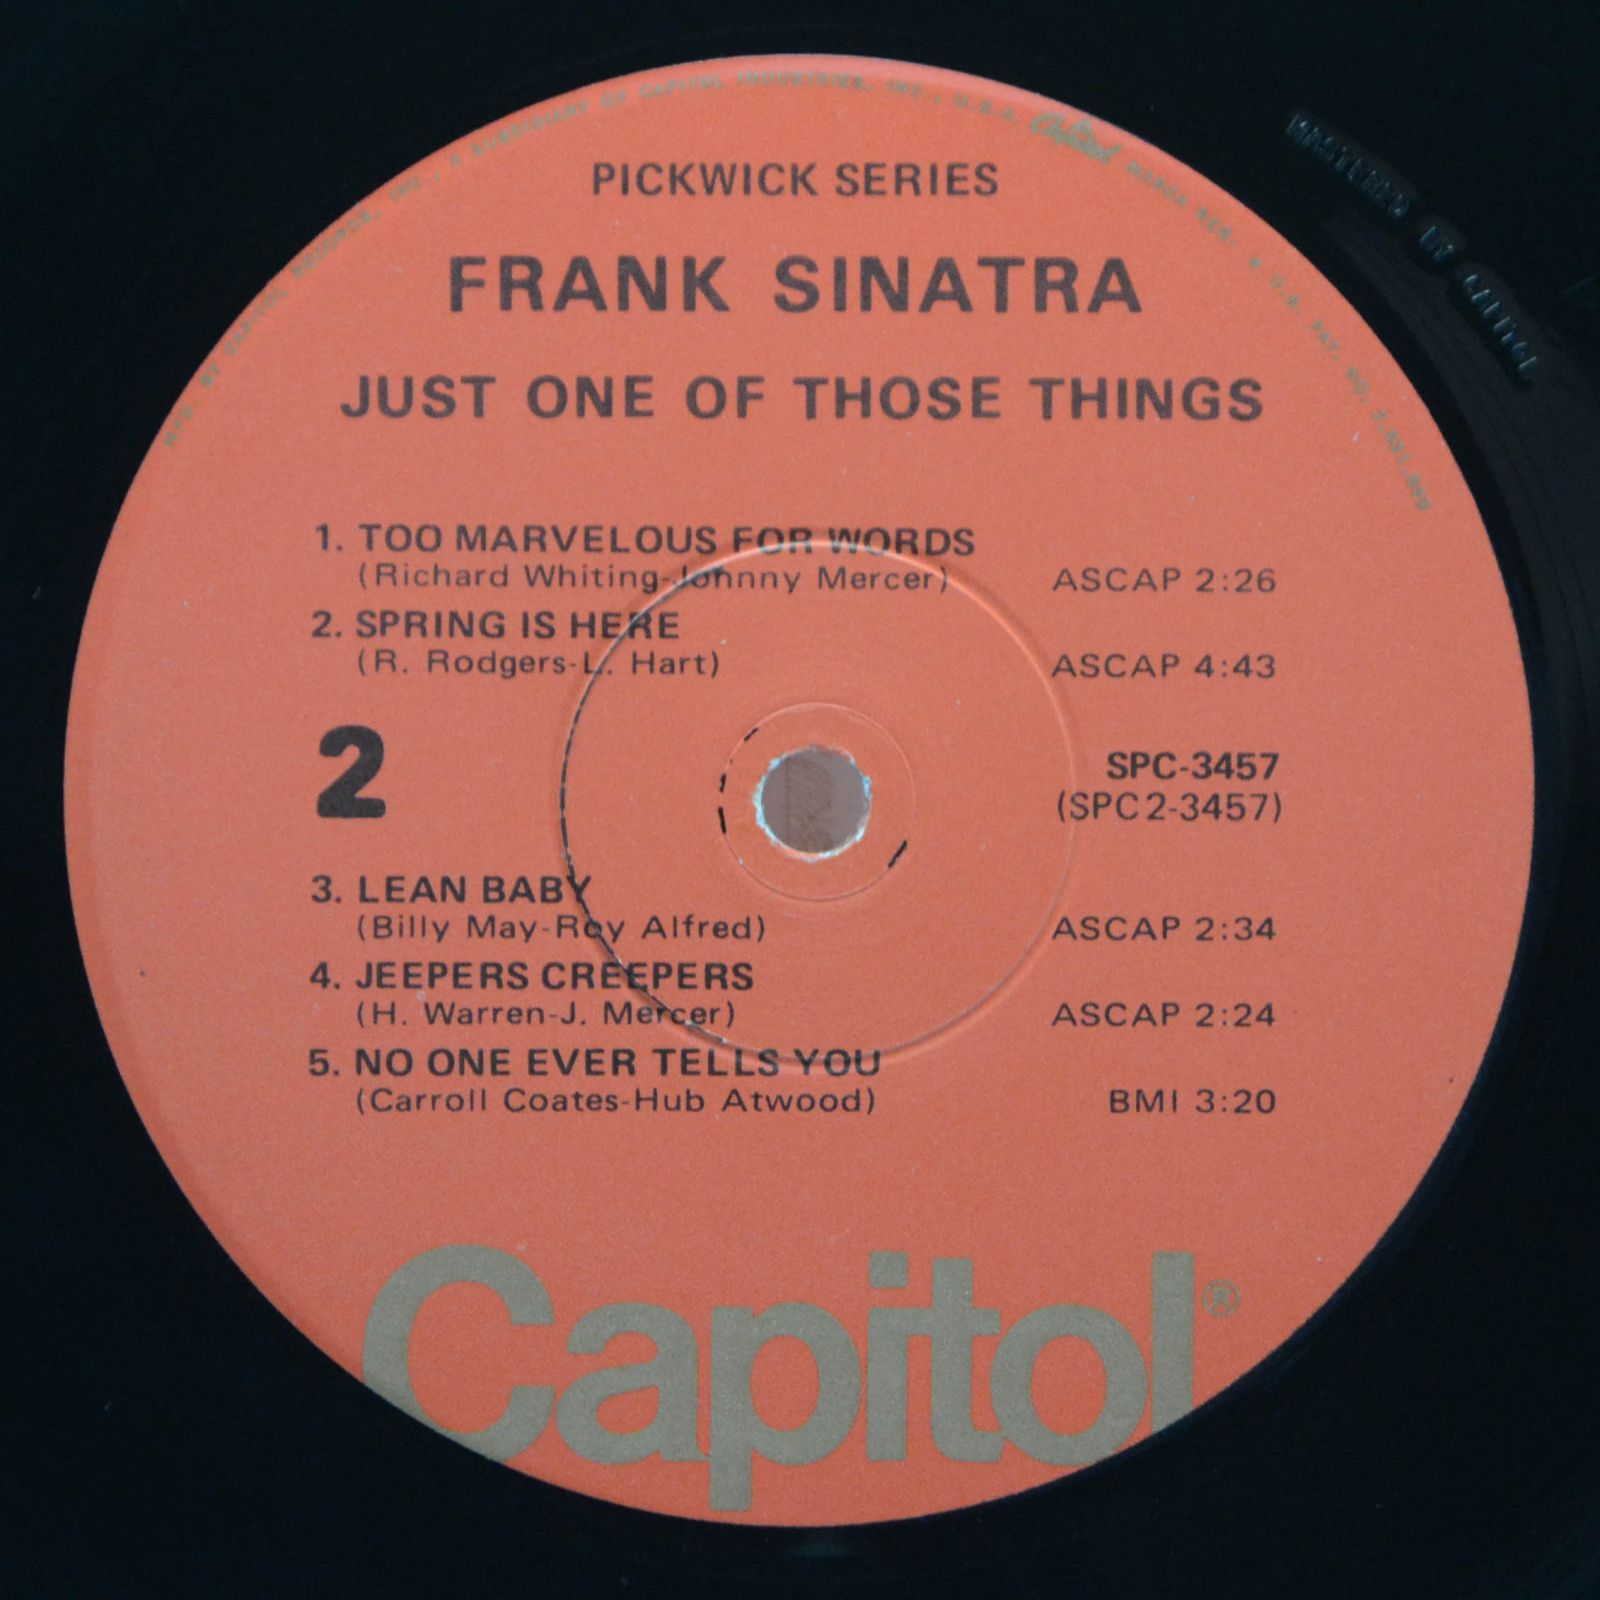 Frank Sinatra — Just One Of Those Things (USA), 1969